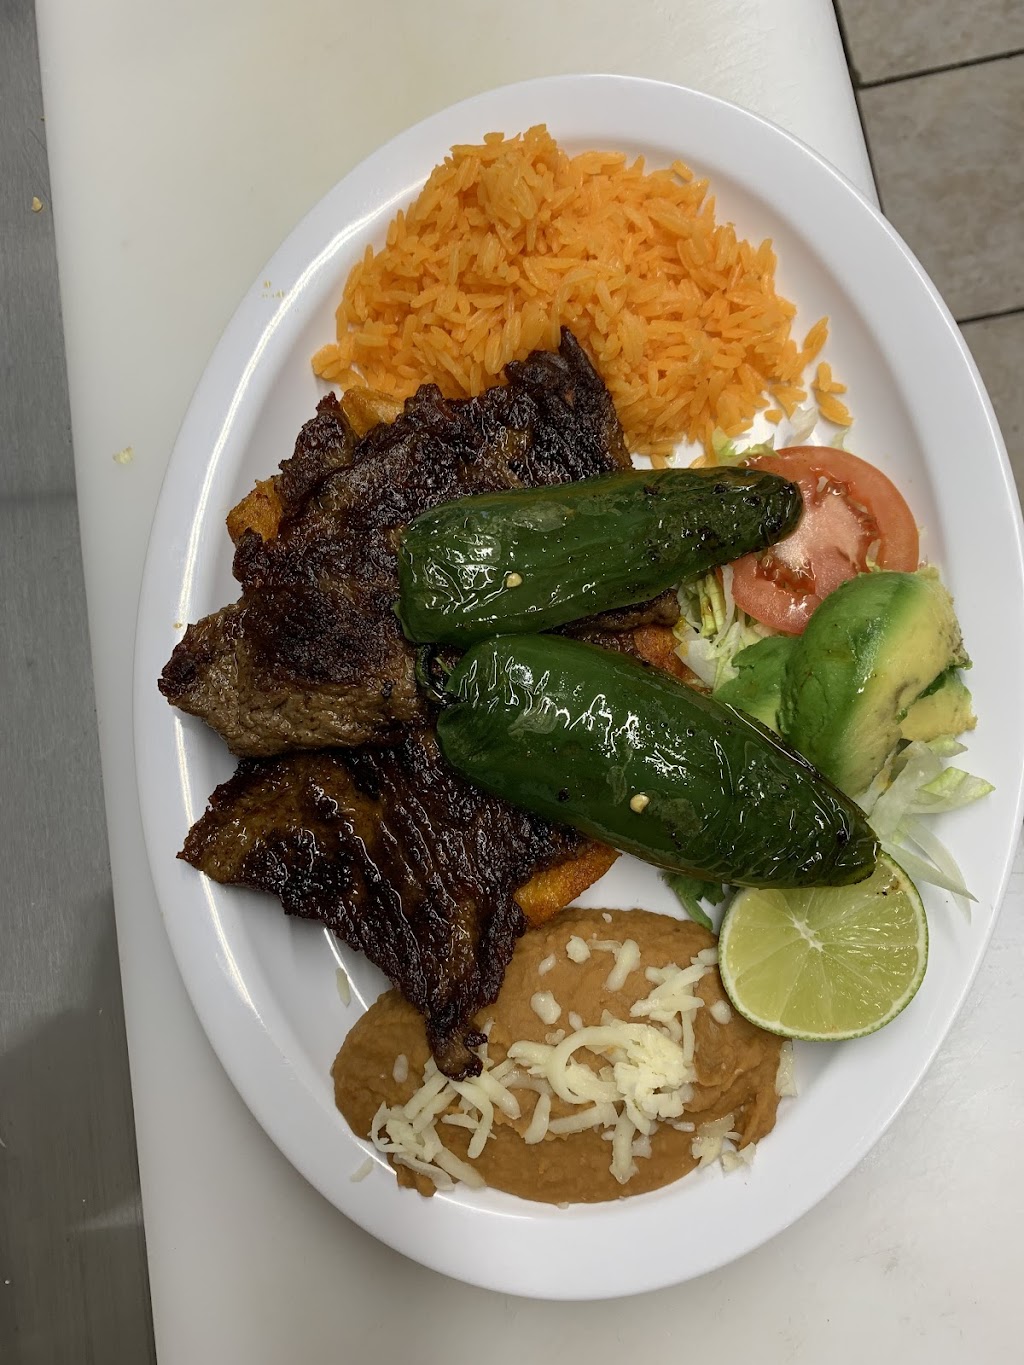 Tacos Burritos Y Mas | 2401 Central Ave, Lake Station, IN 46405 | Phone: (219) 962-3532